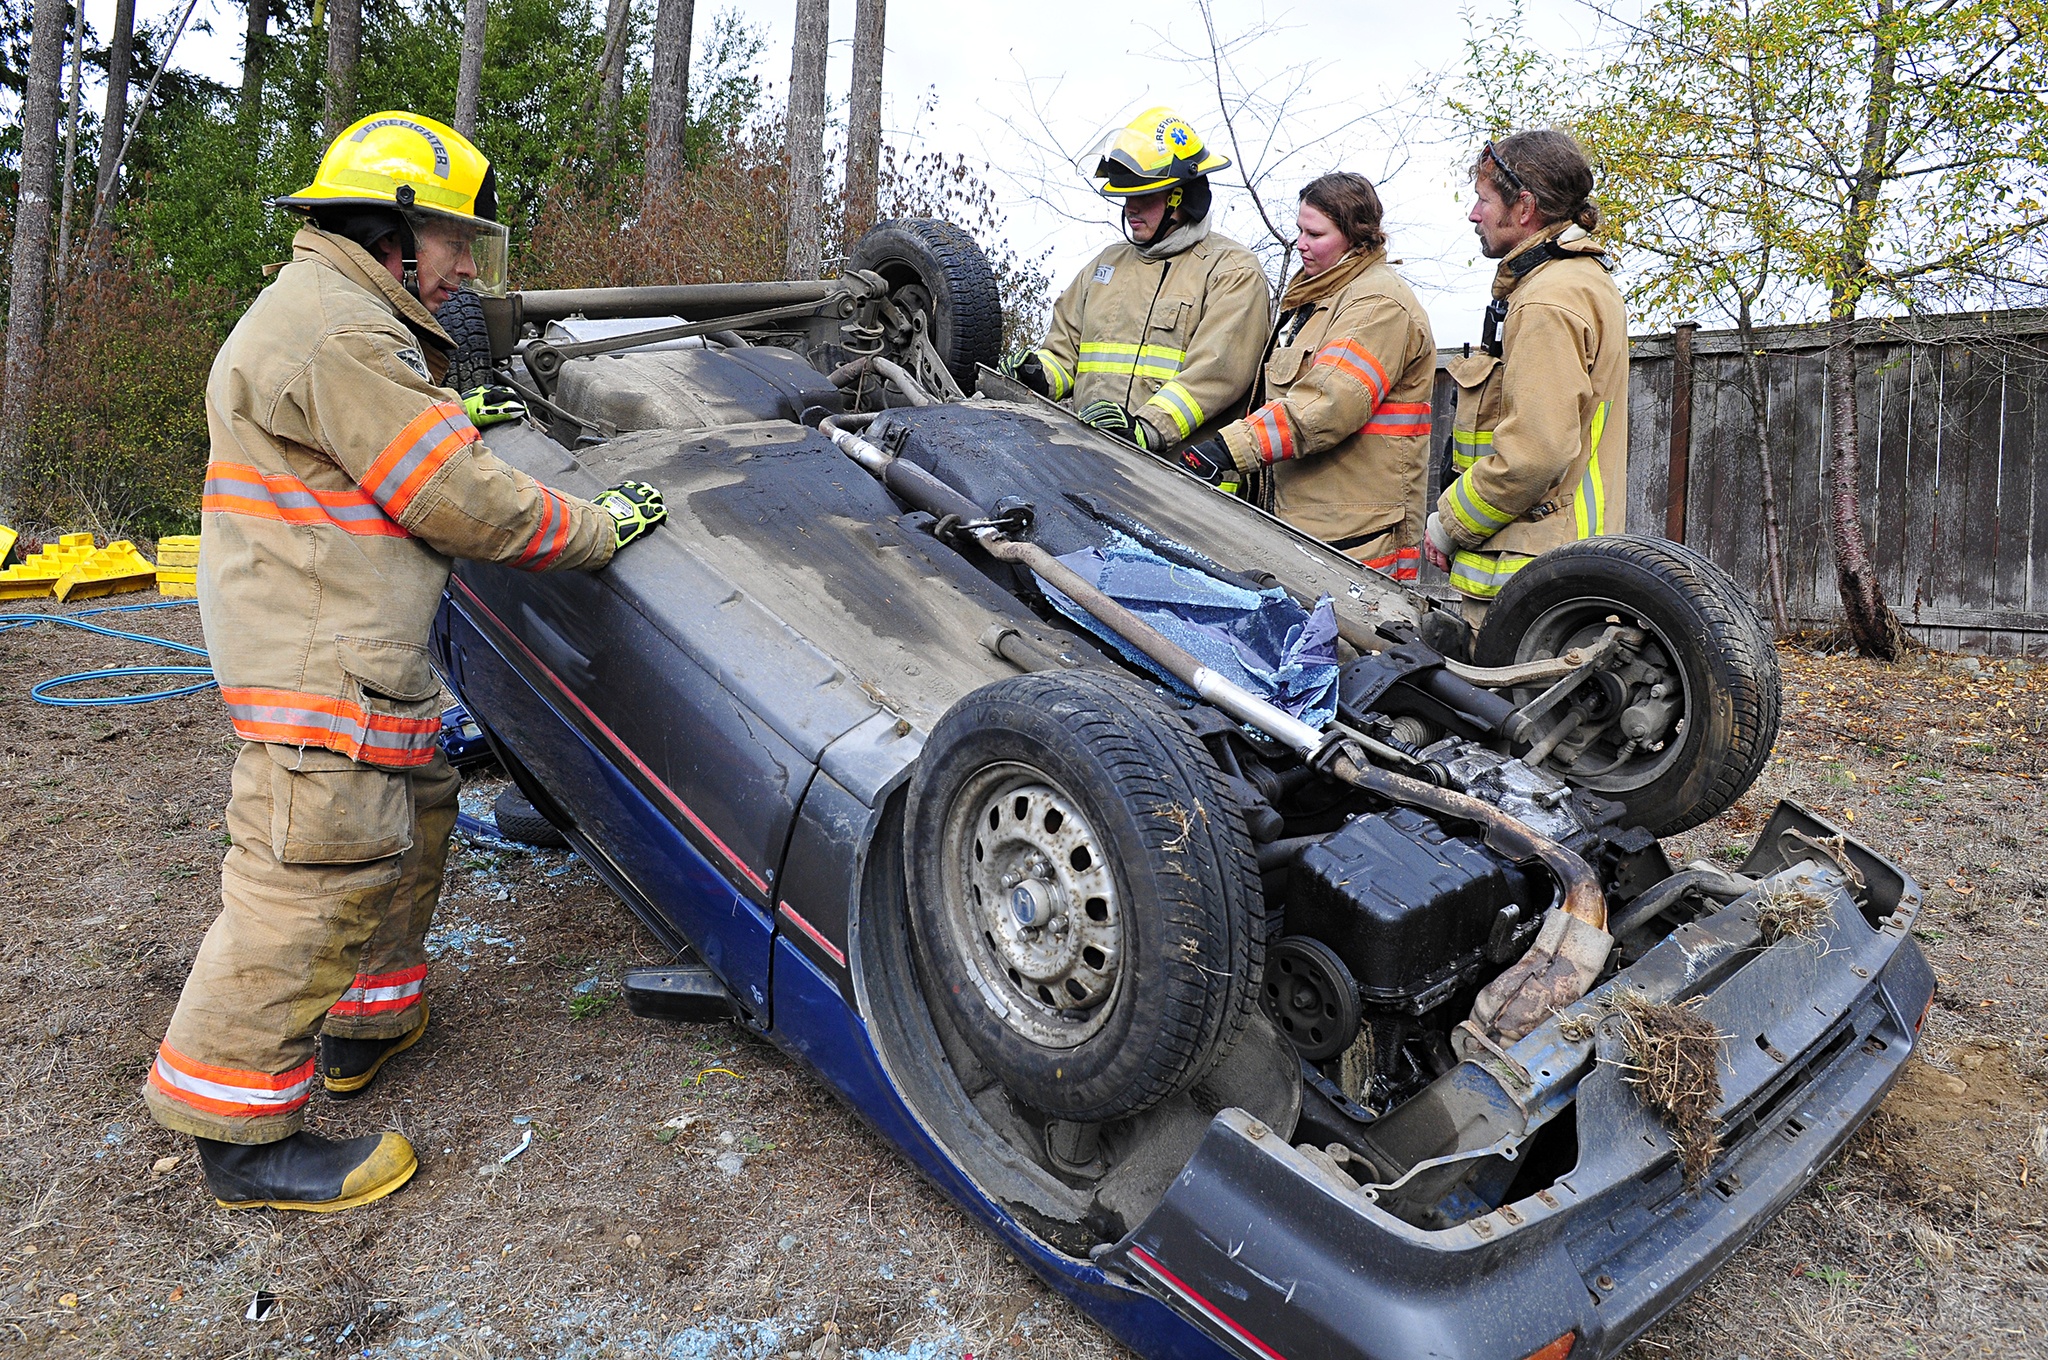 Photo by Michael Watkins/Whidbey News-Times                                Volunteer firefighters with North Whidbey Fire and Rescue station 25 work together to secure an overturned vehicle during a simulated rescue Saturday in Oak Harbor.